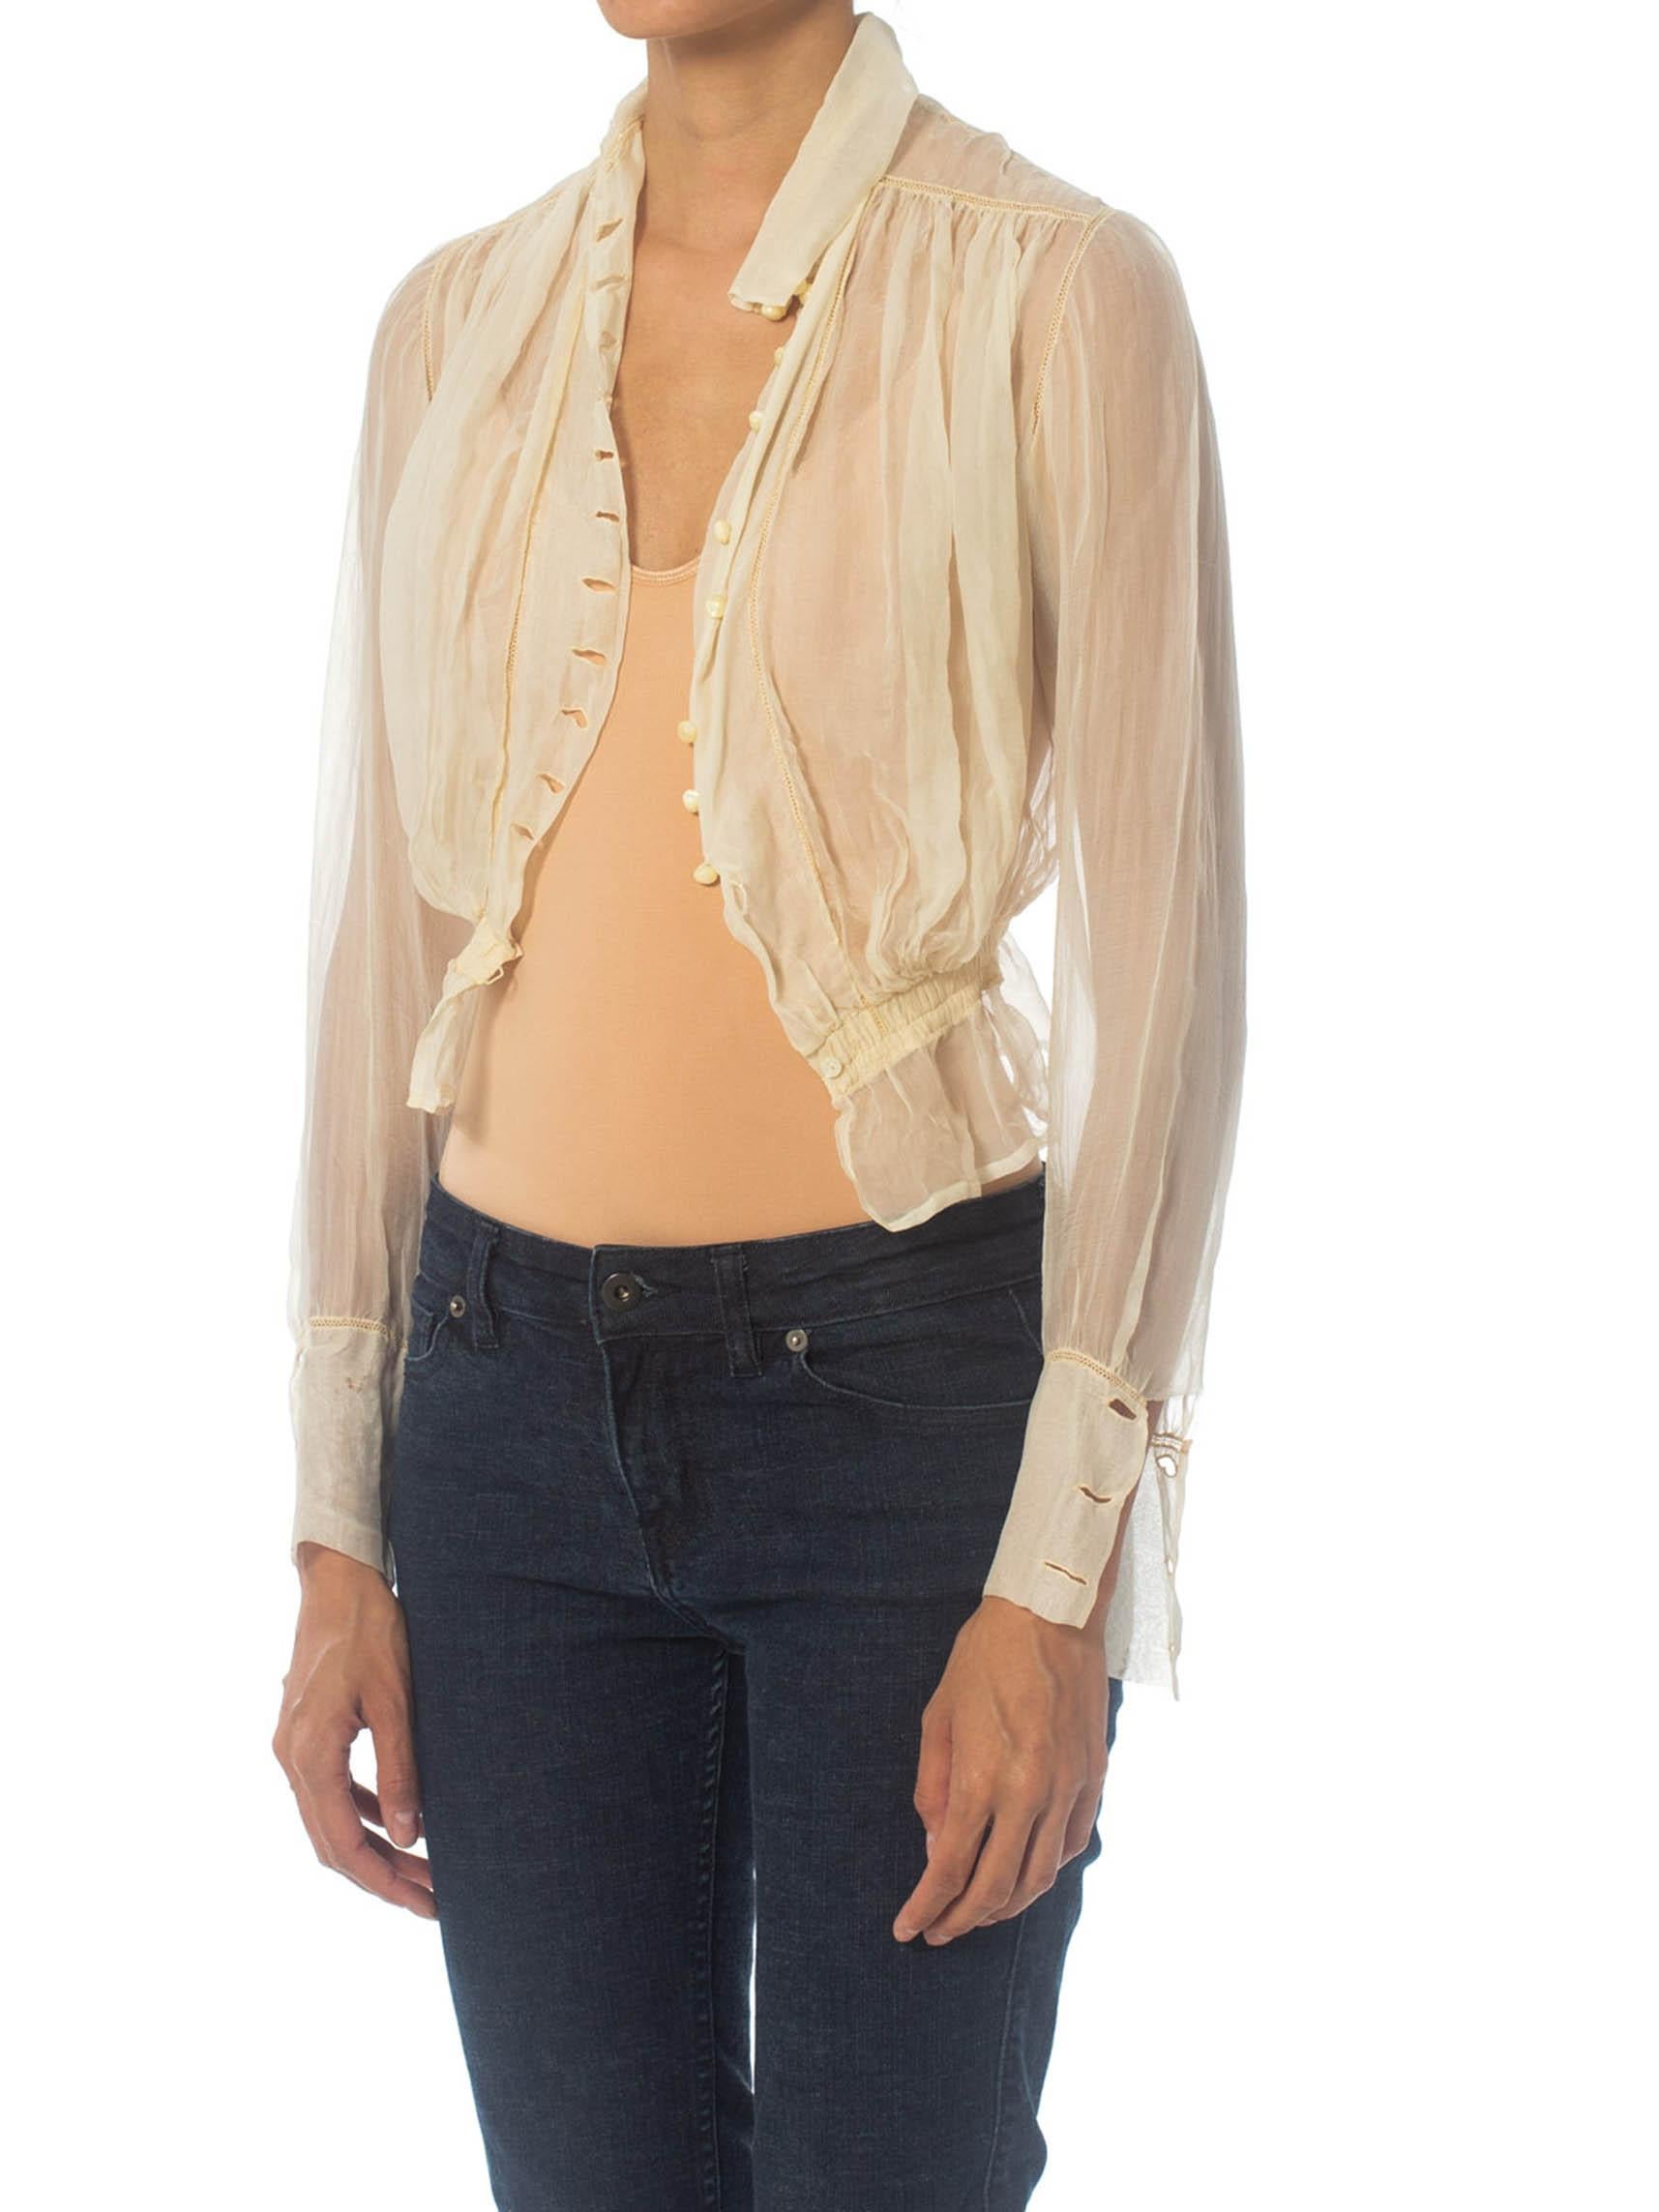 Edwardian Ivory Light Weight Silk Haute Couture Blouse With Mother-Of-Pearl Buttons From Paris